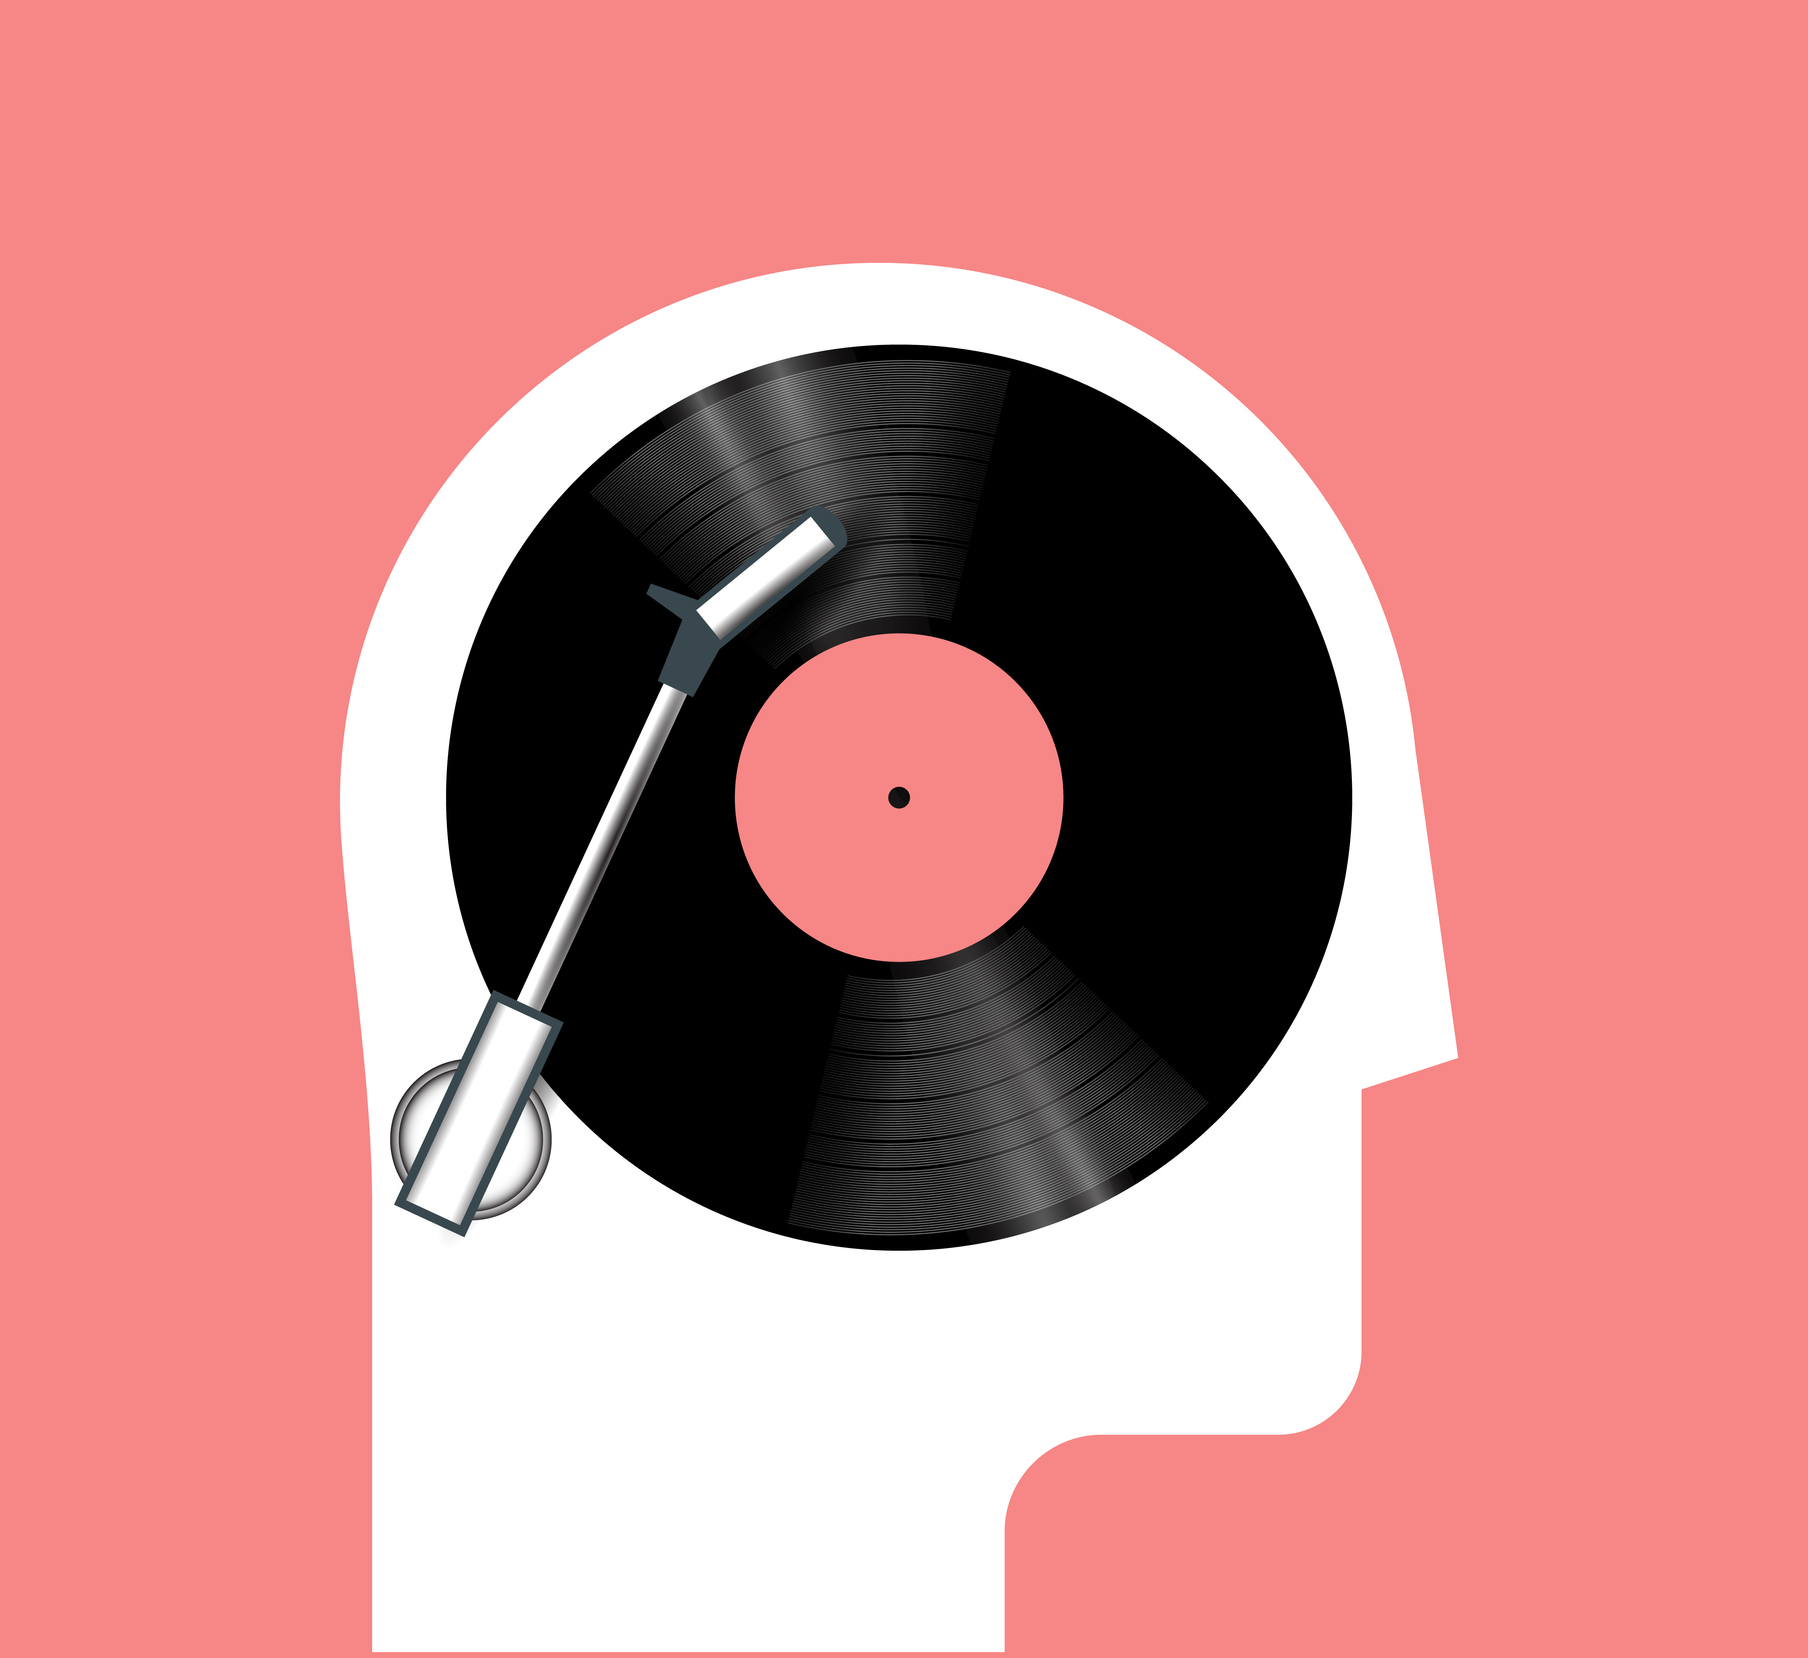 Music listening concept with side view human head silhouette and vinyl disc inside. Musical poster or banner concept. Isolated on red background. Minimalistic vector illustration.